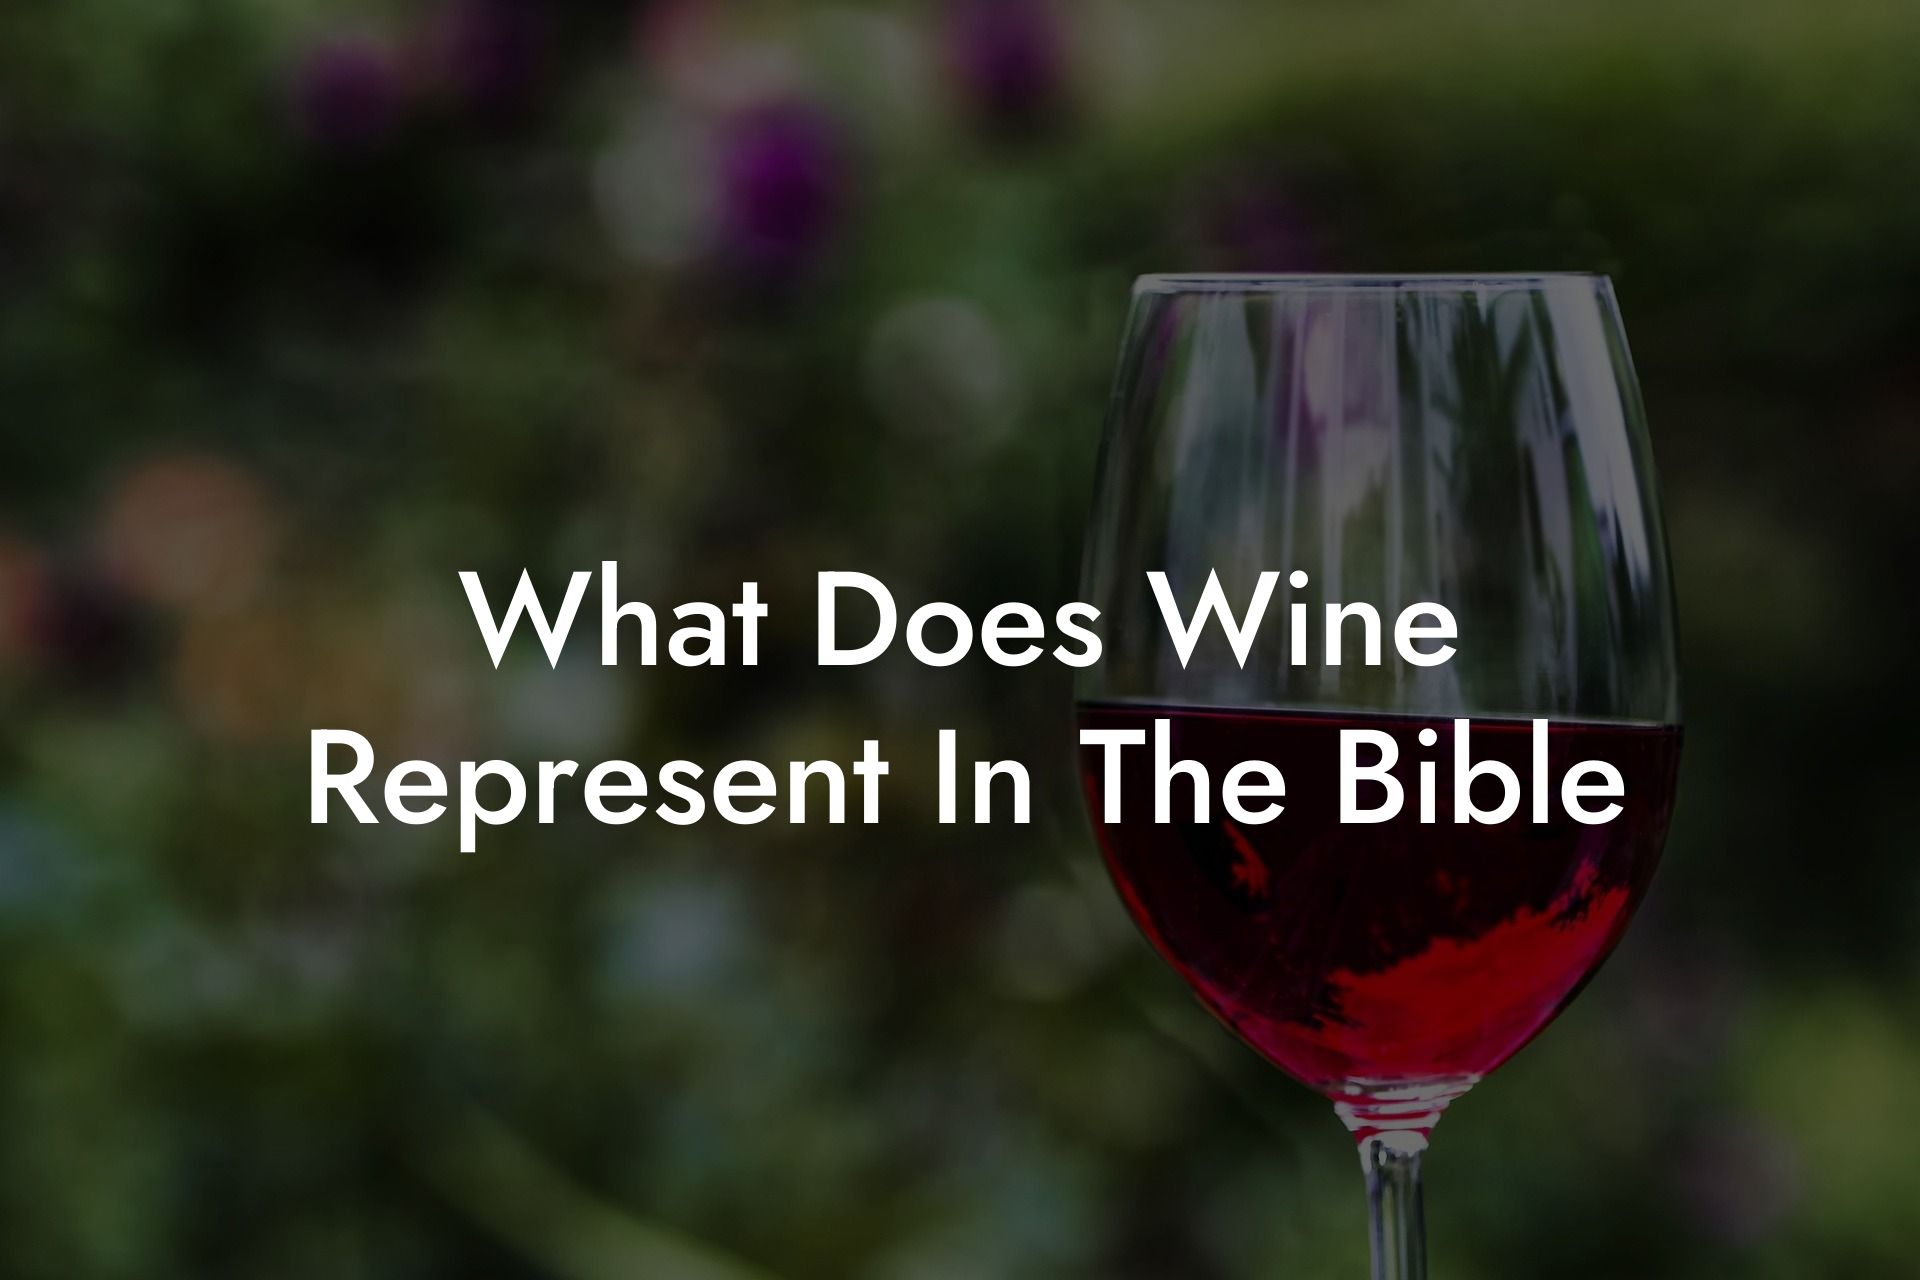 What Does Wine Represent In The Bible